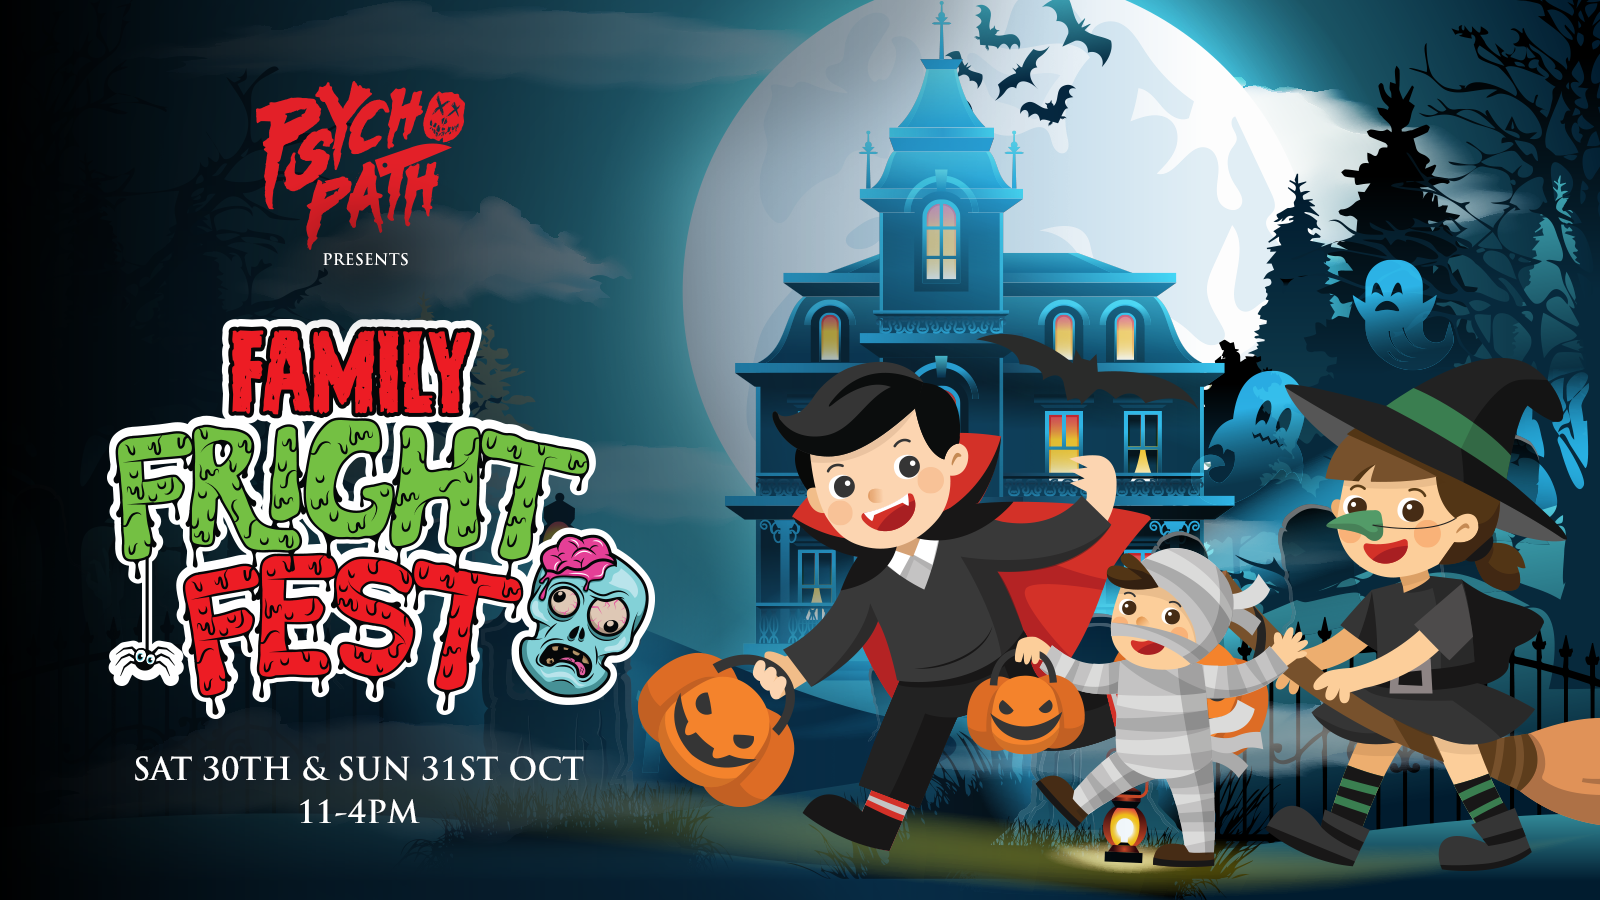 SOLD OUT – FAMILY FRIGHT FEST